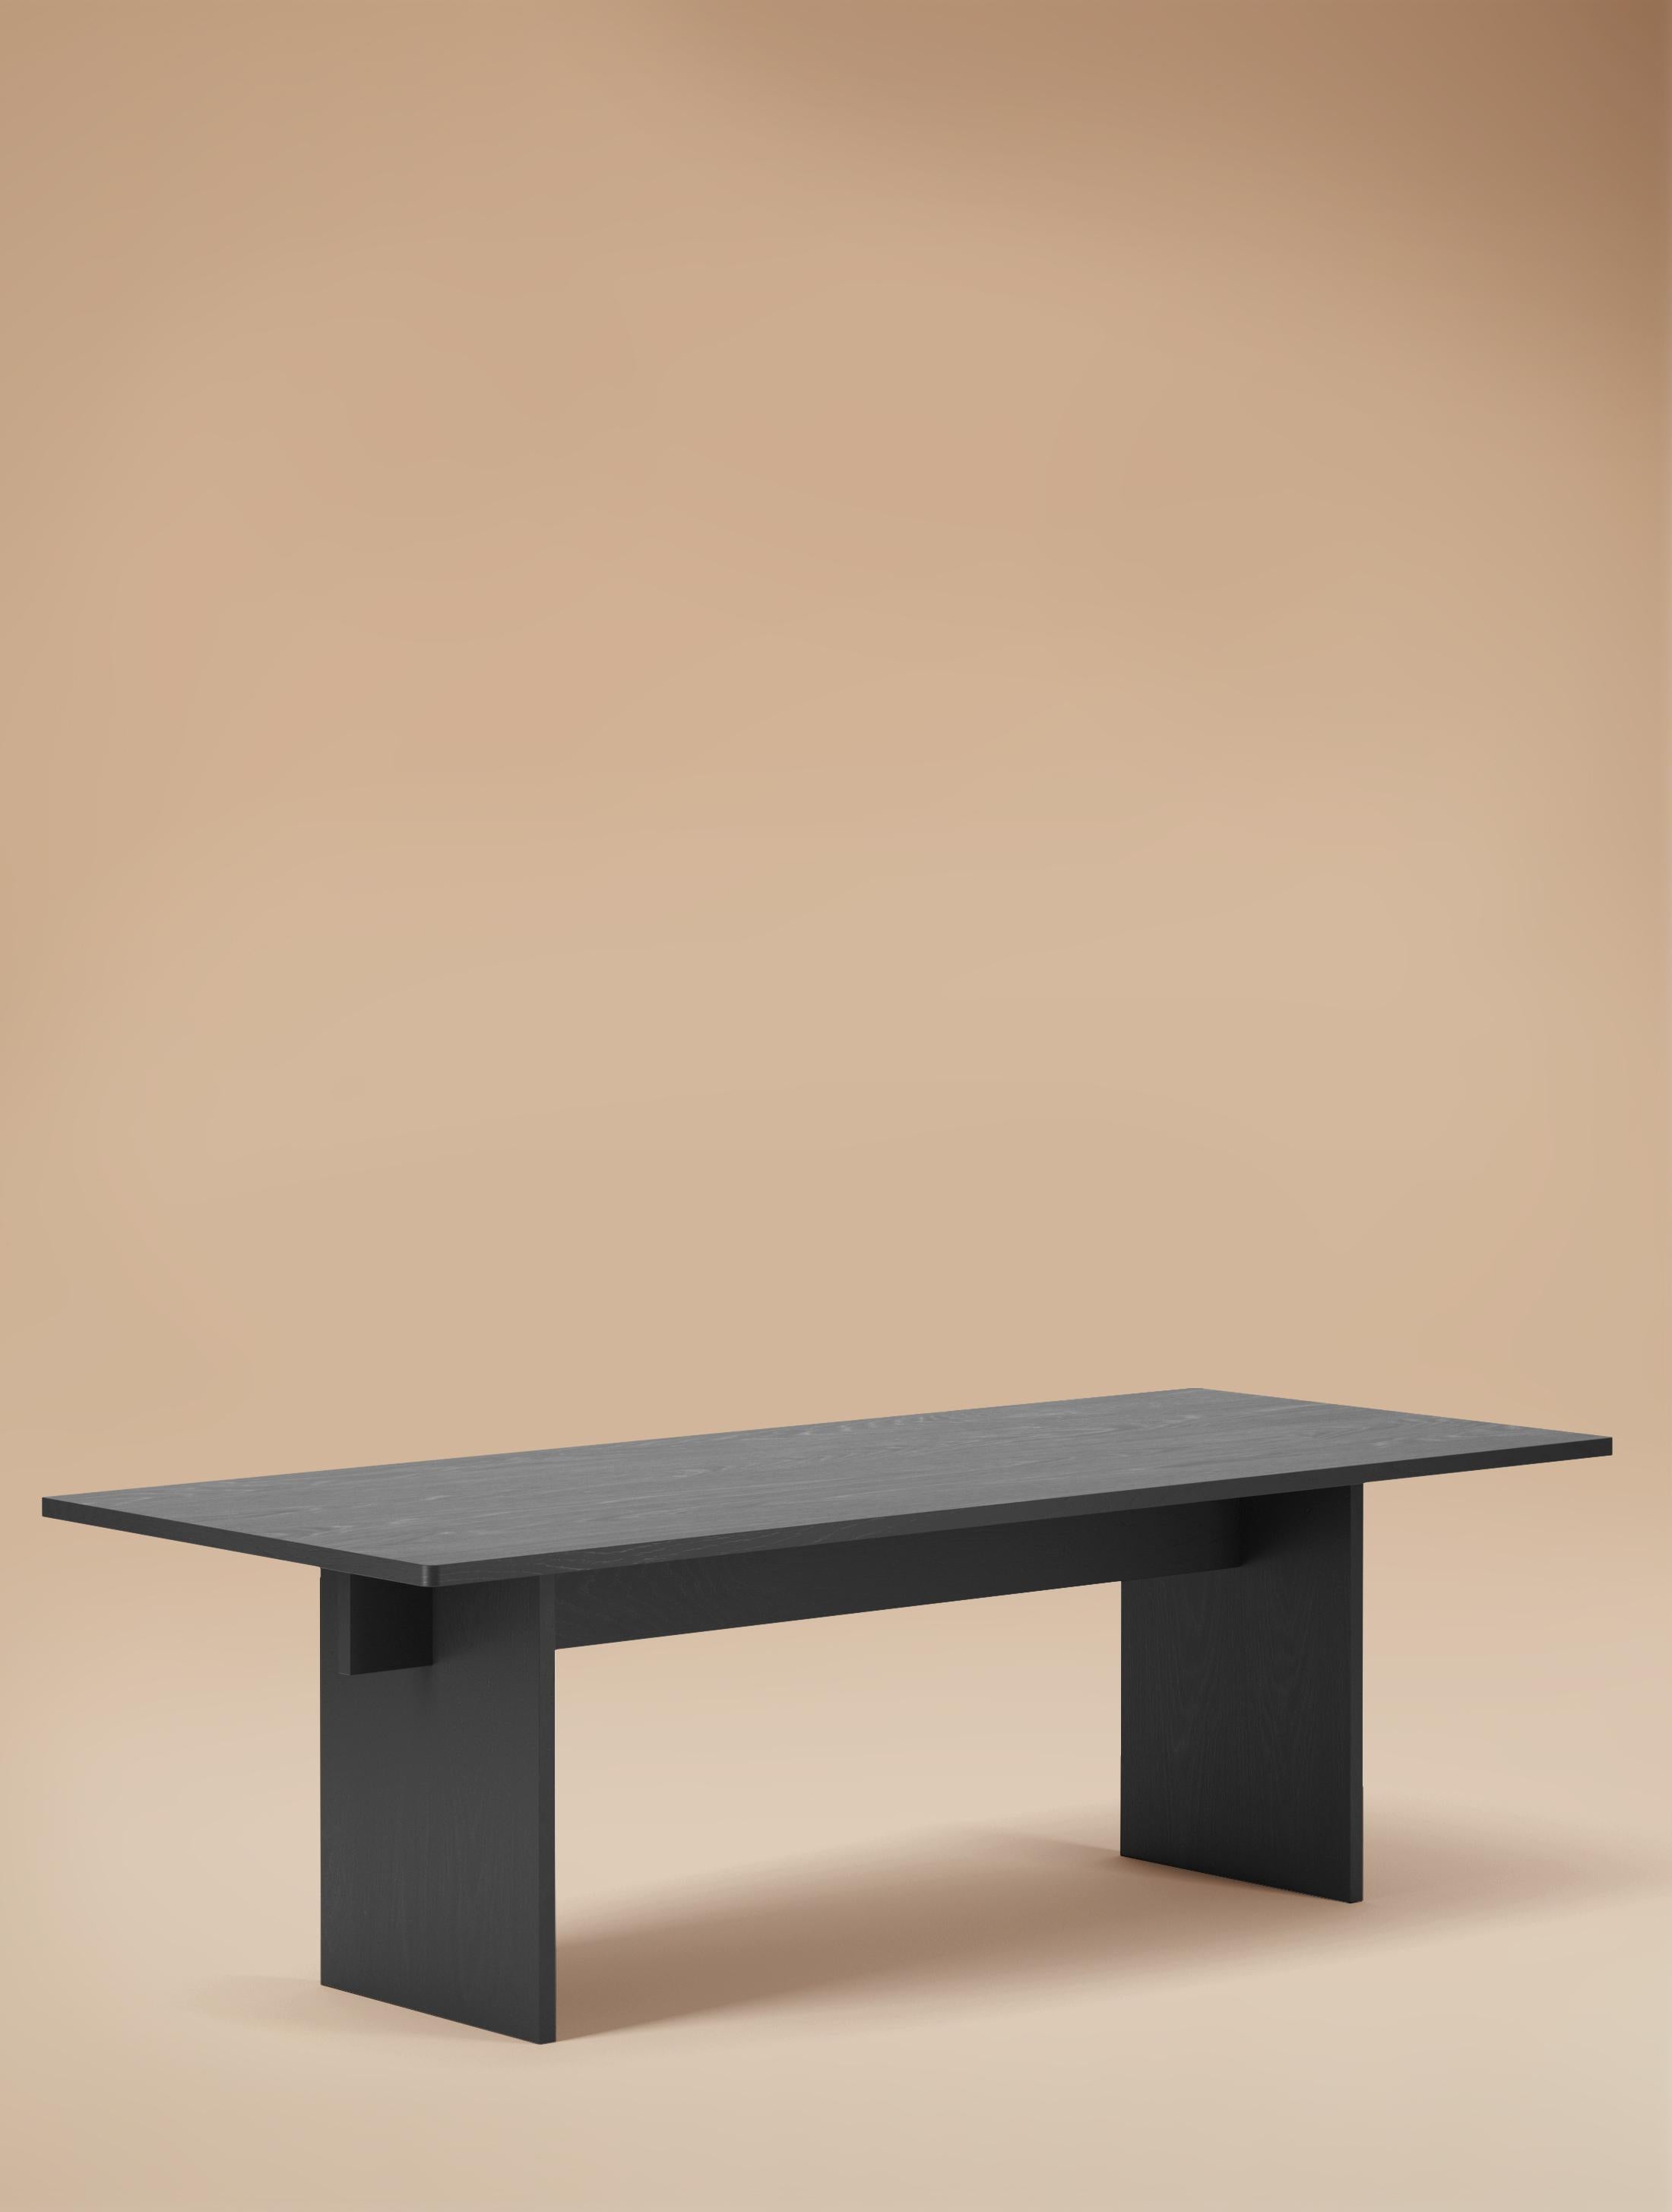 8 Seater Faure Table Handcrafted in Charcoal Oiled Oak by Kevin Frankental  13